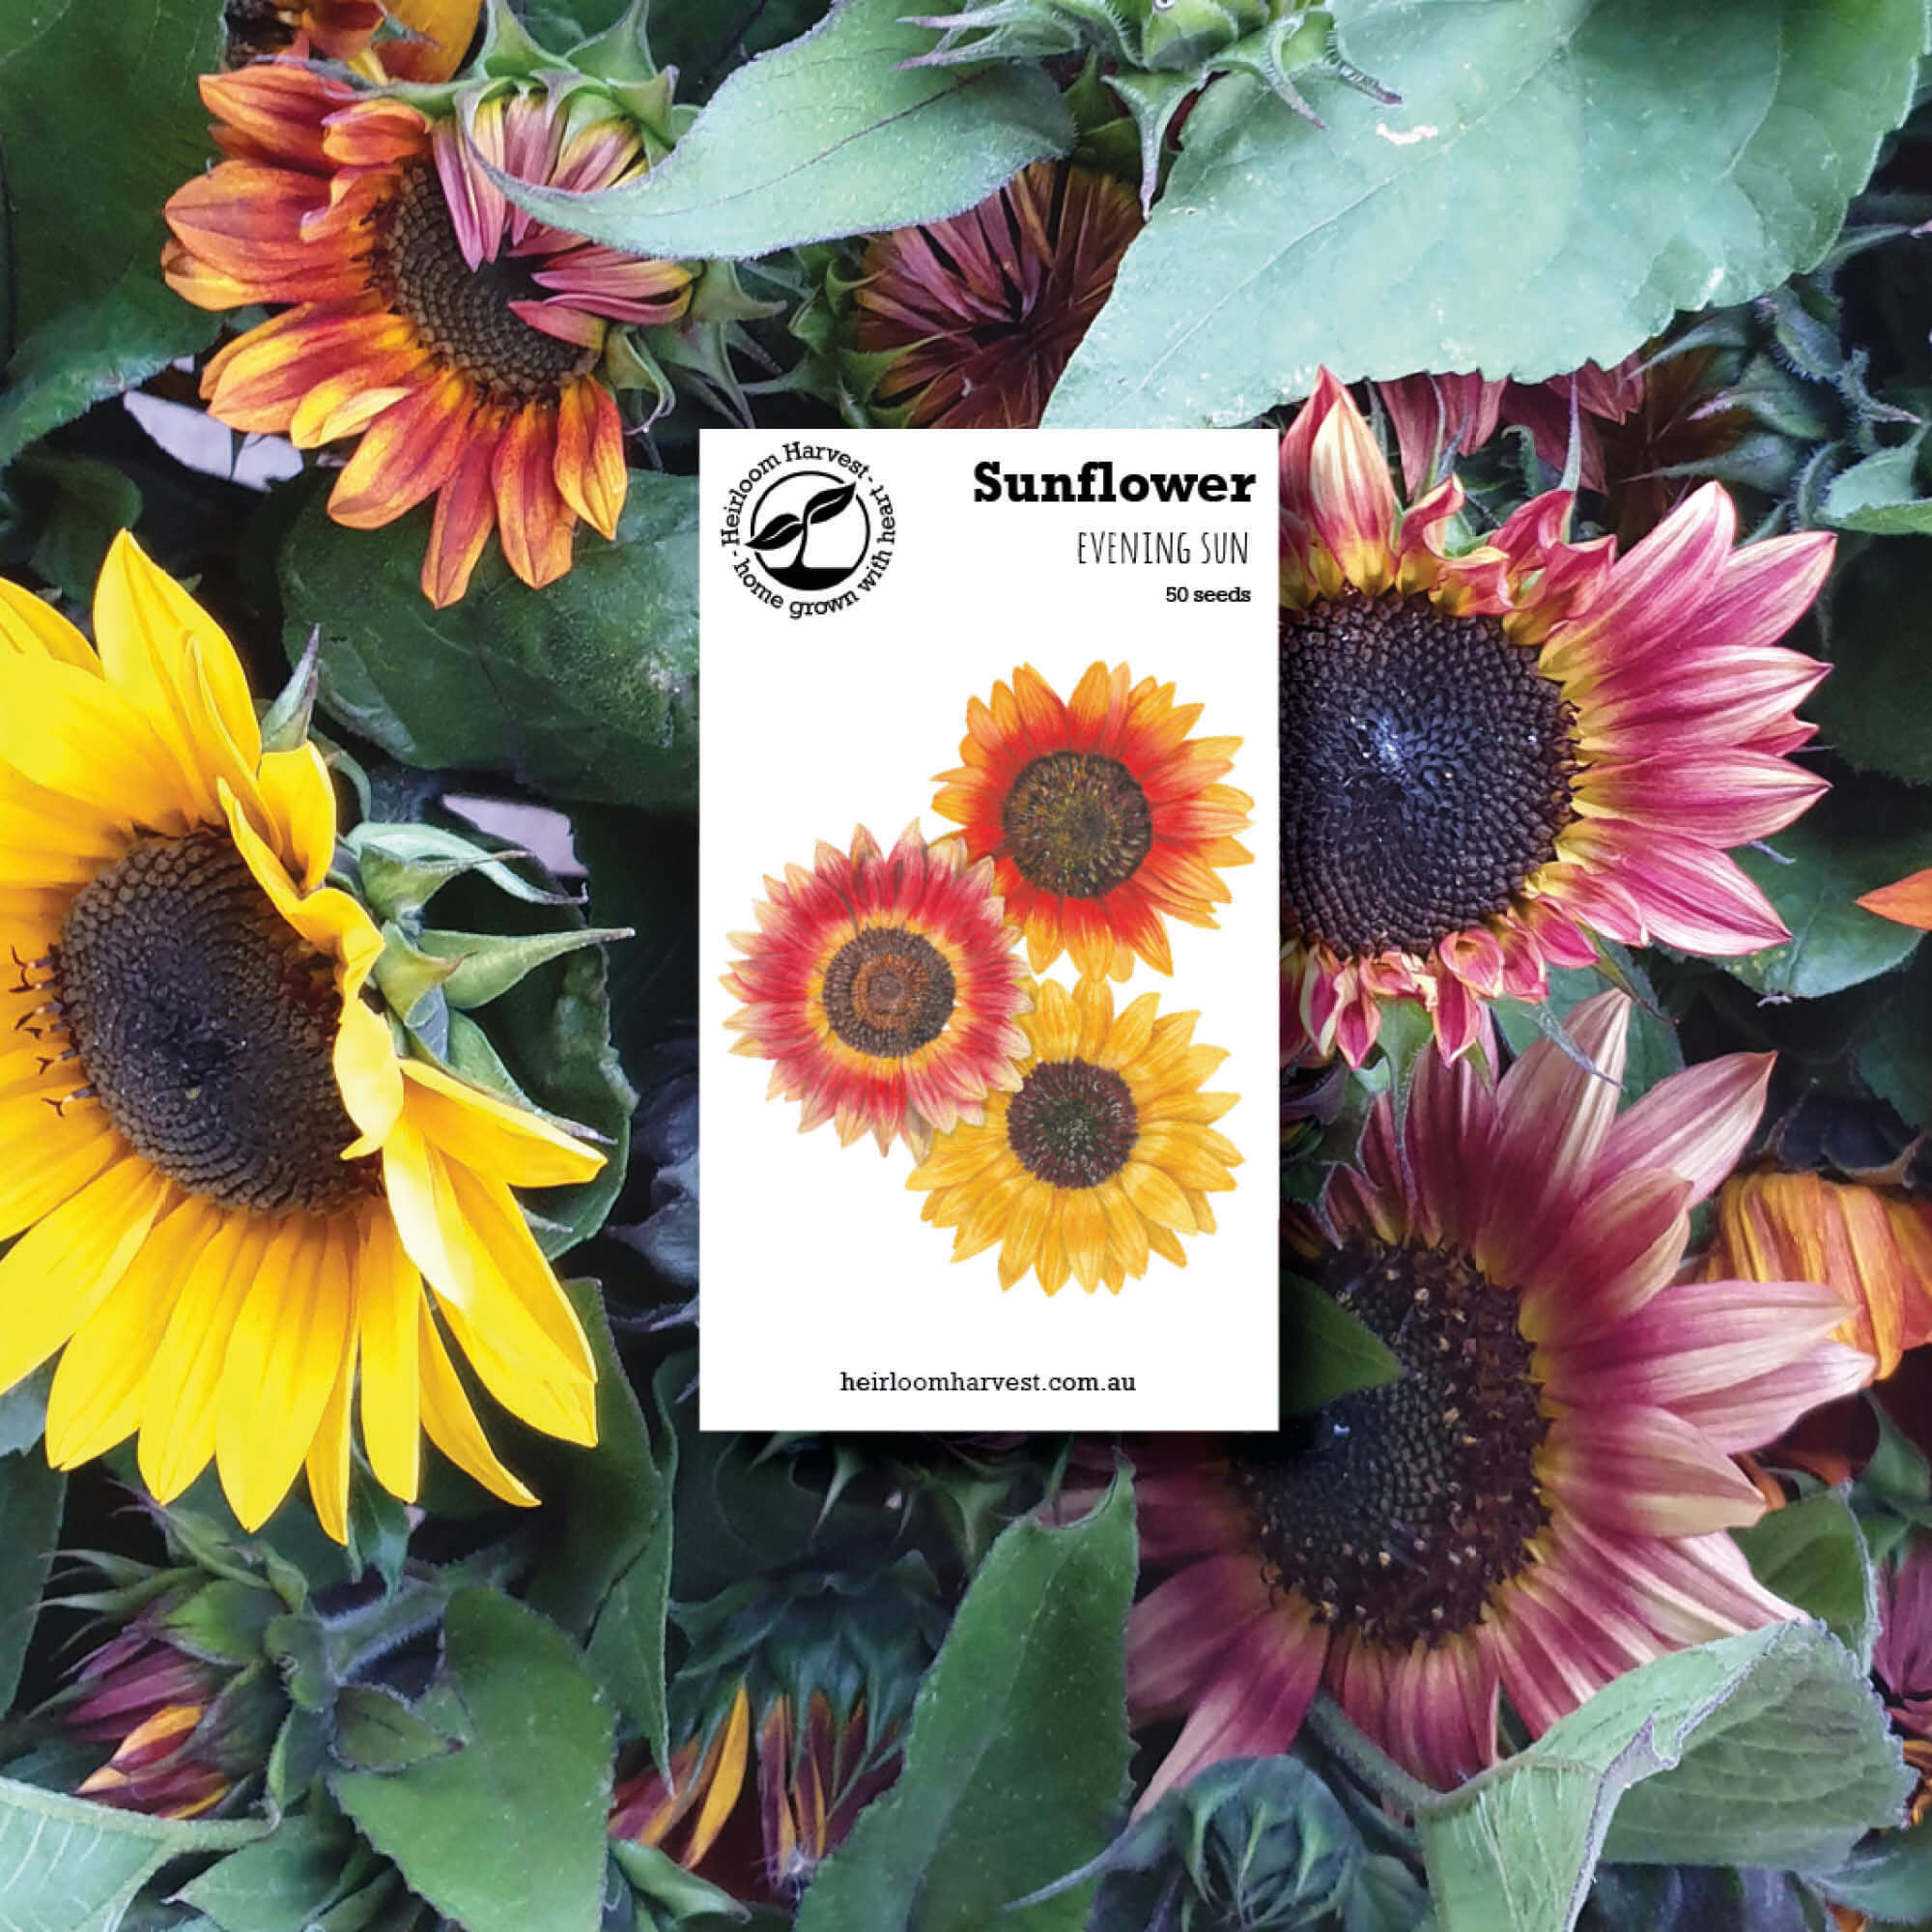 Sunflower Organic flower seeds made by Heirloom Harvest in Australia from Your Wild Books